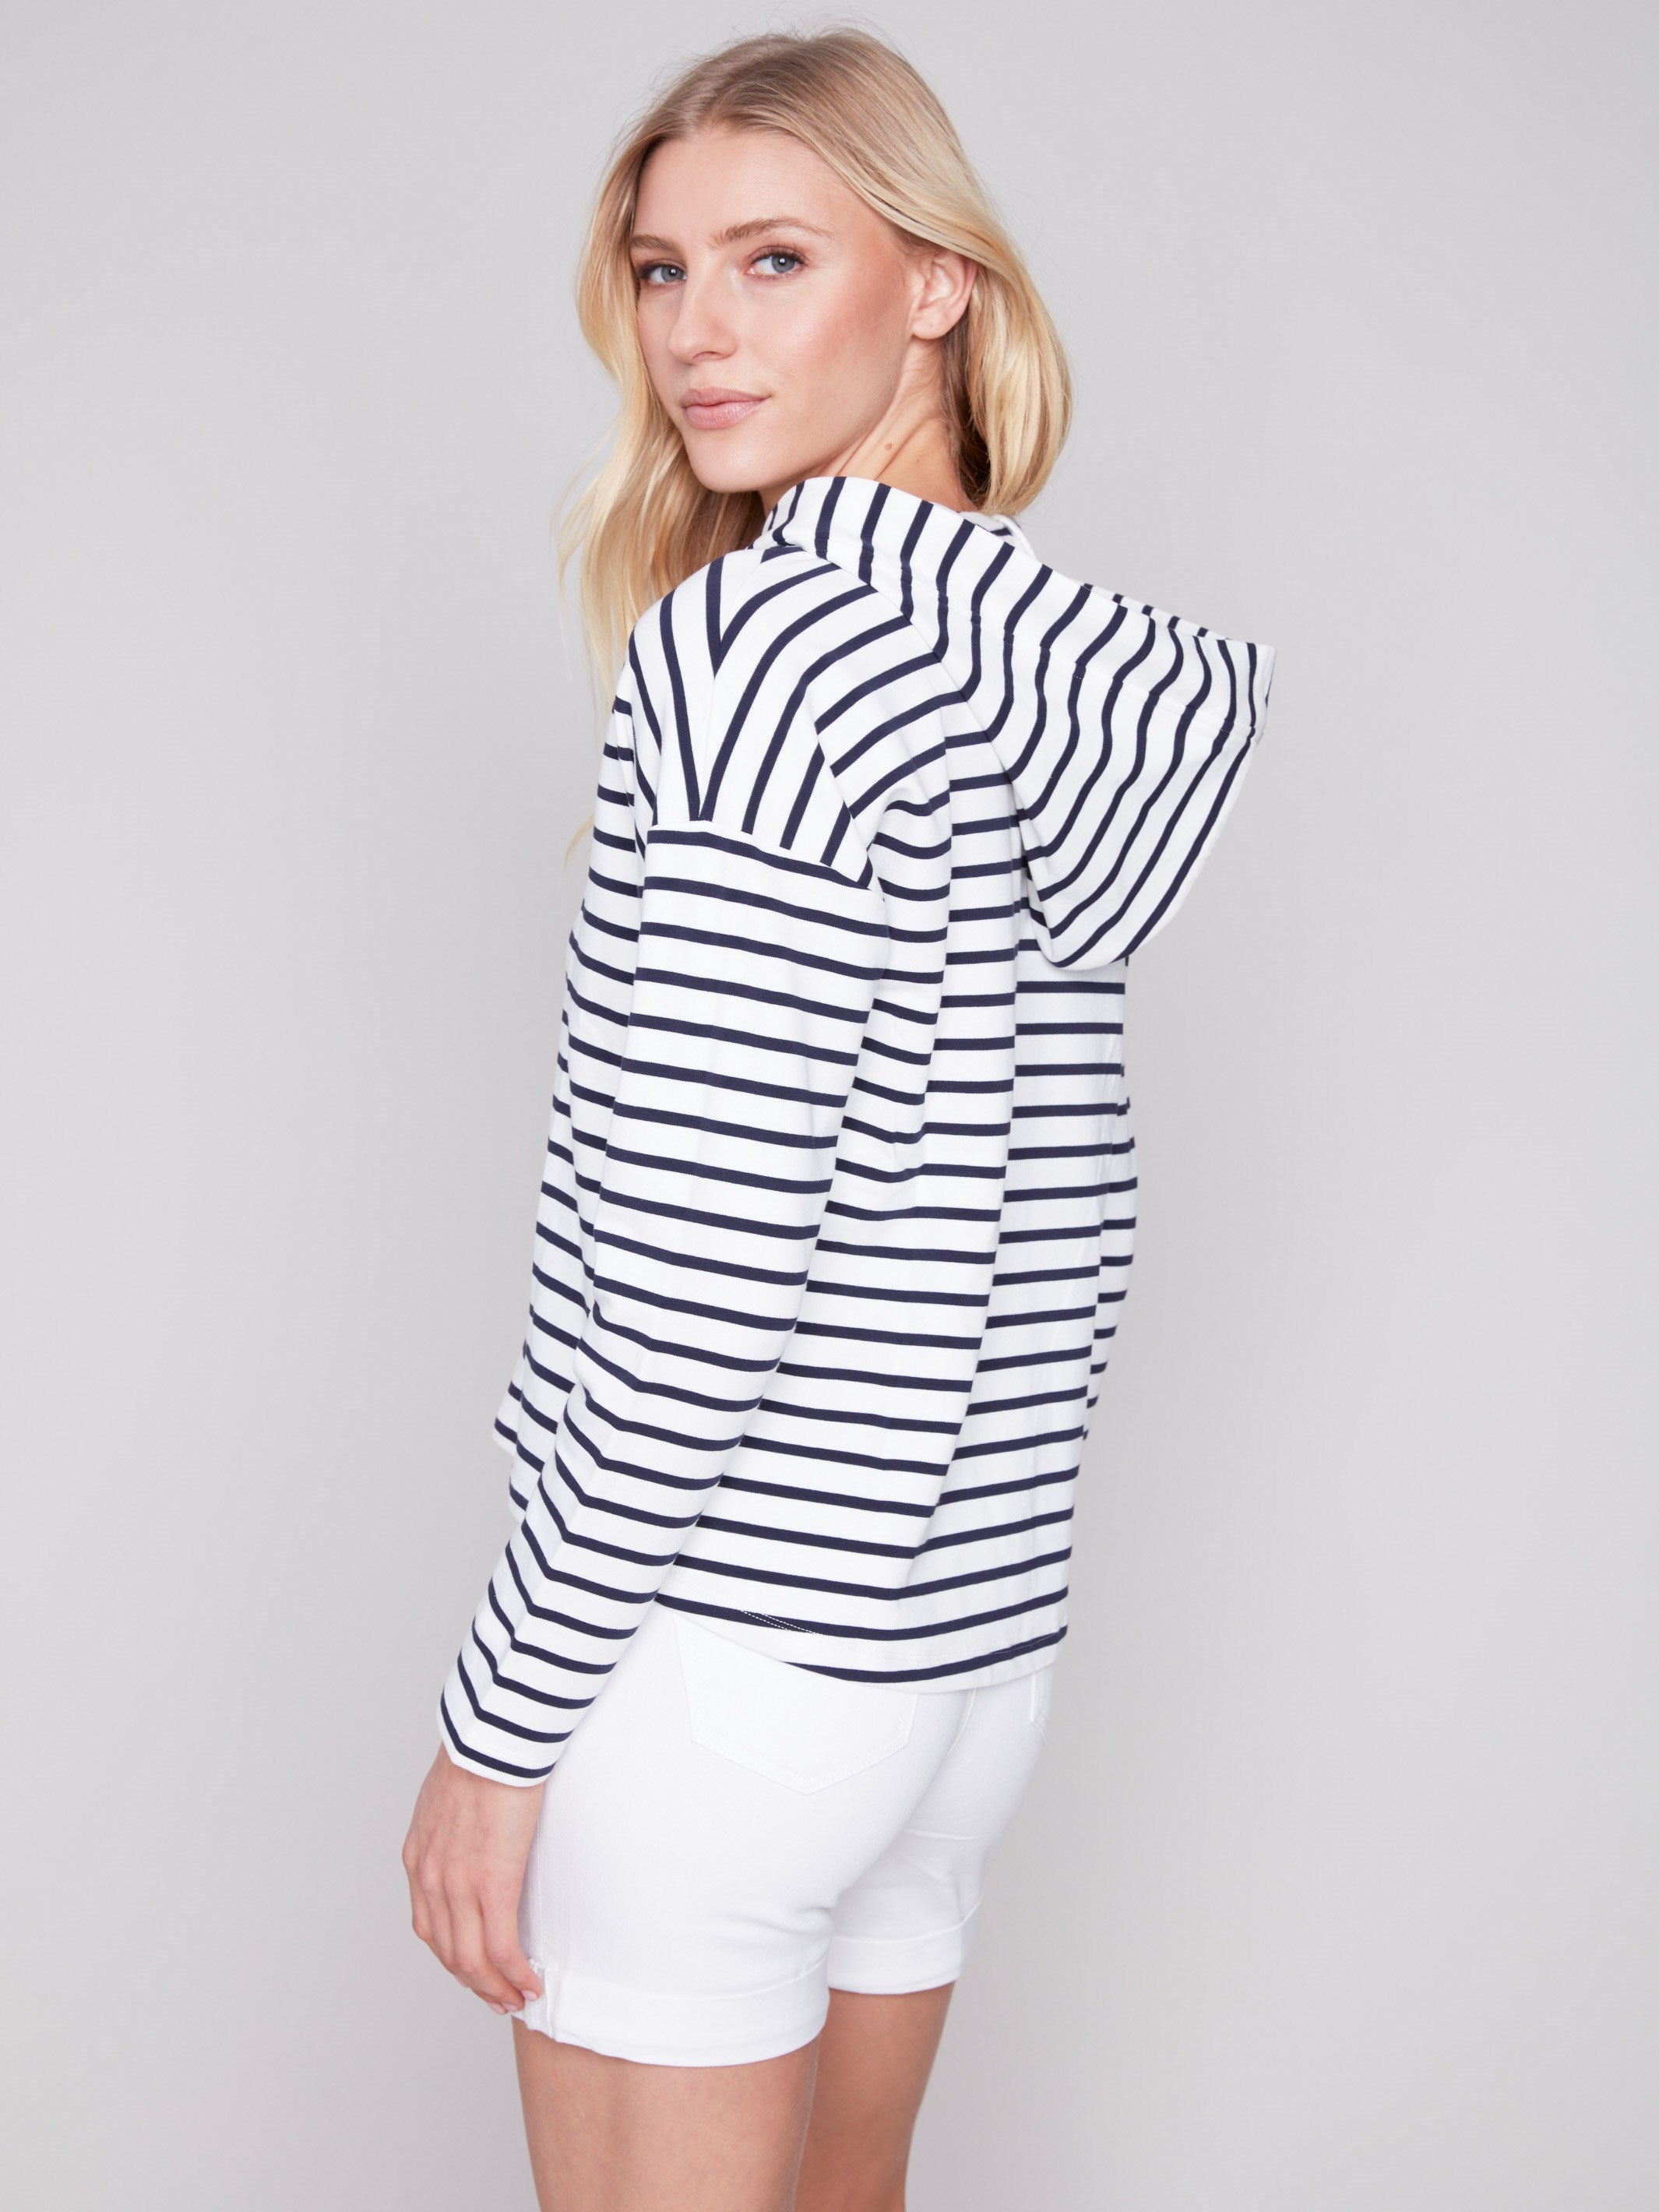 Striped V-Neck Top - Navy - Charlie B Collection Canada - Image 2